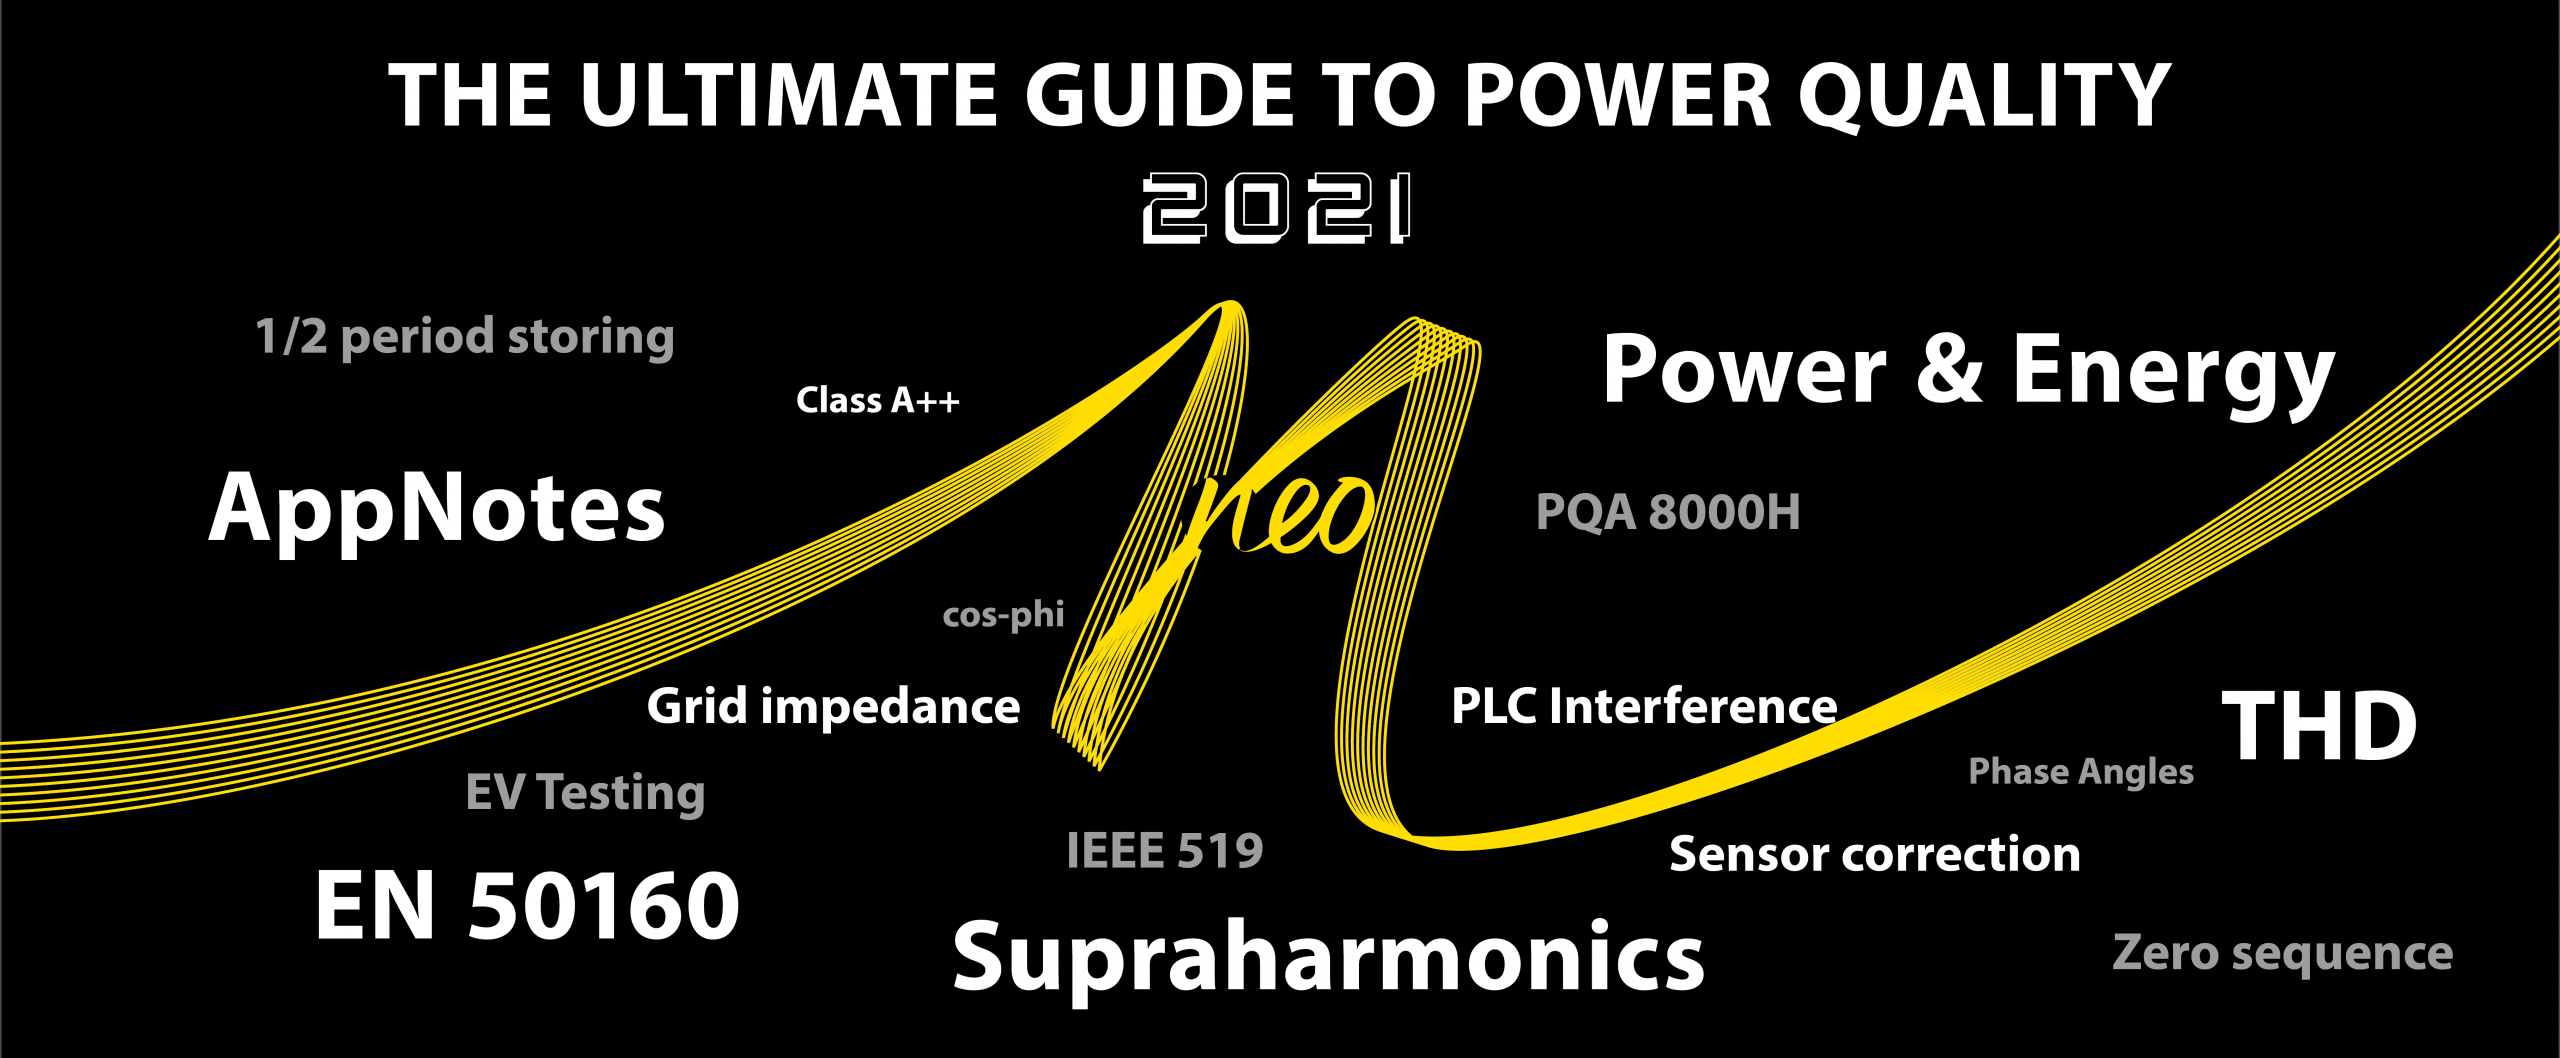 The Ultimate Guide To Power Quality 2021